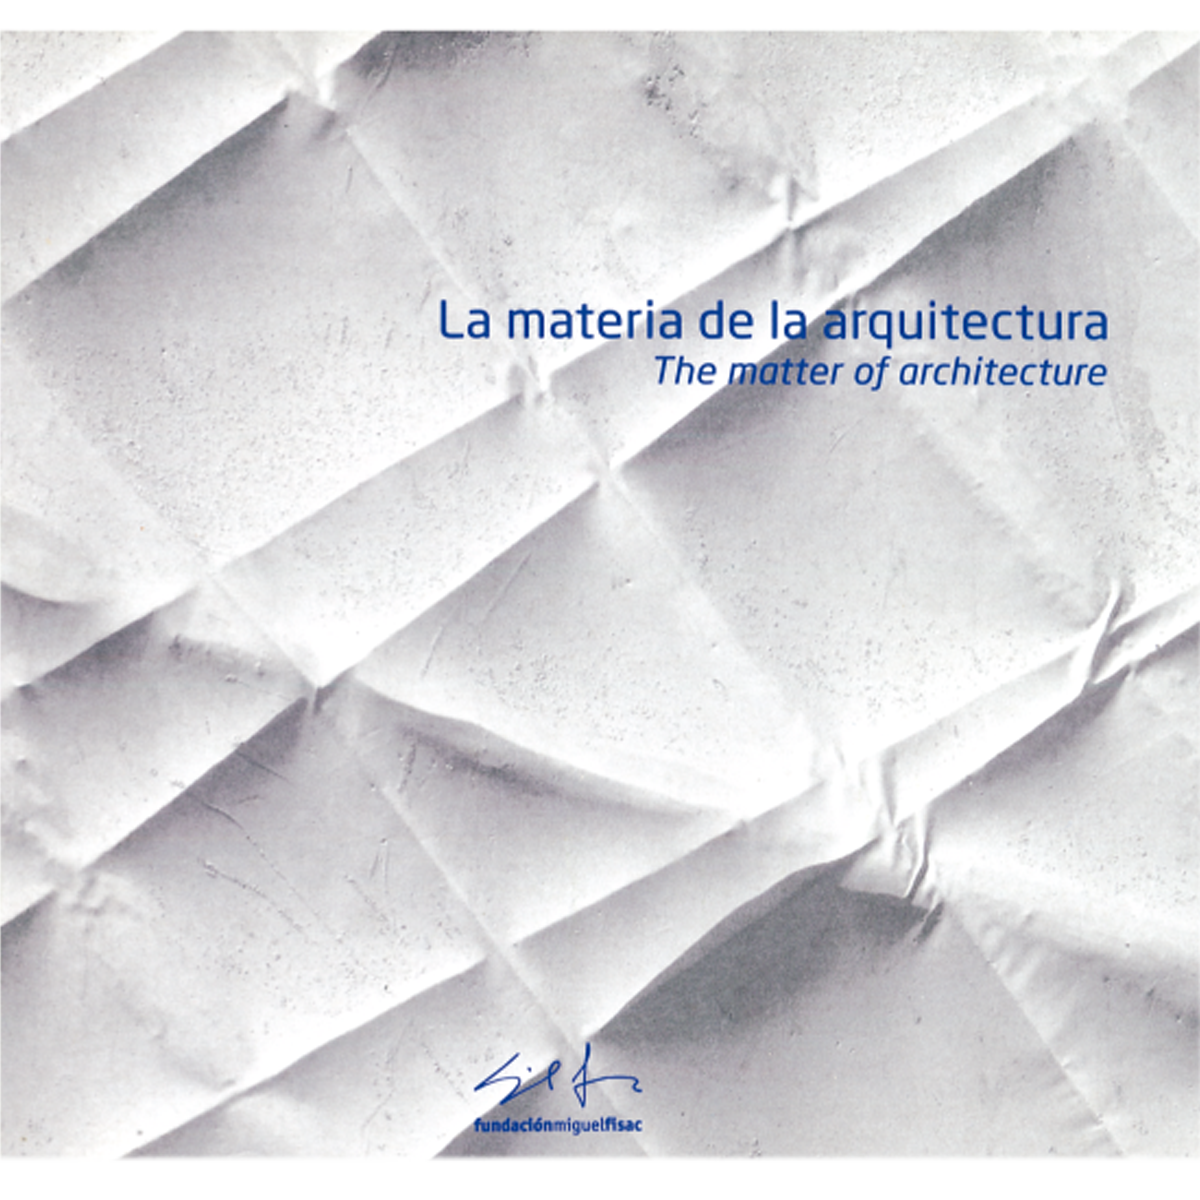 The matter of architecture